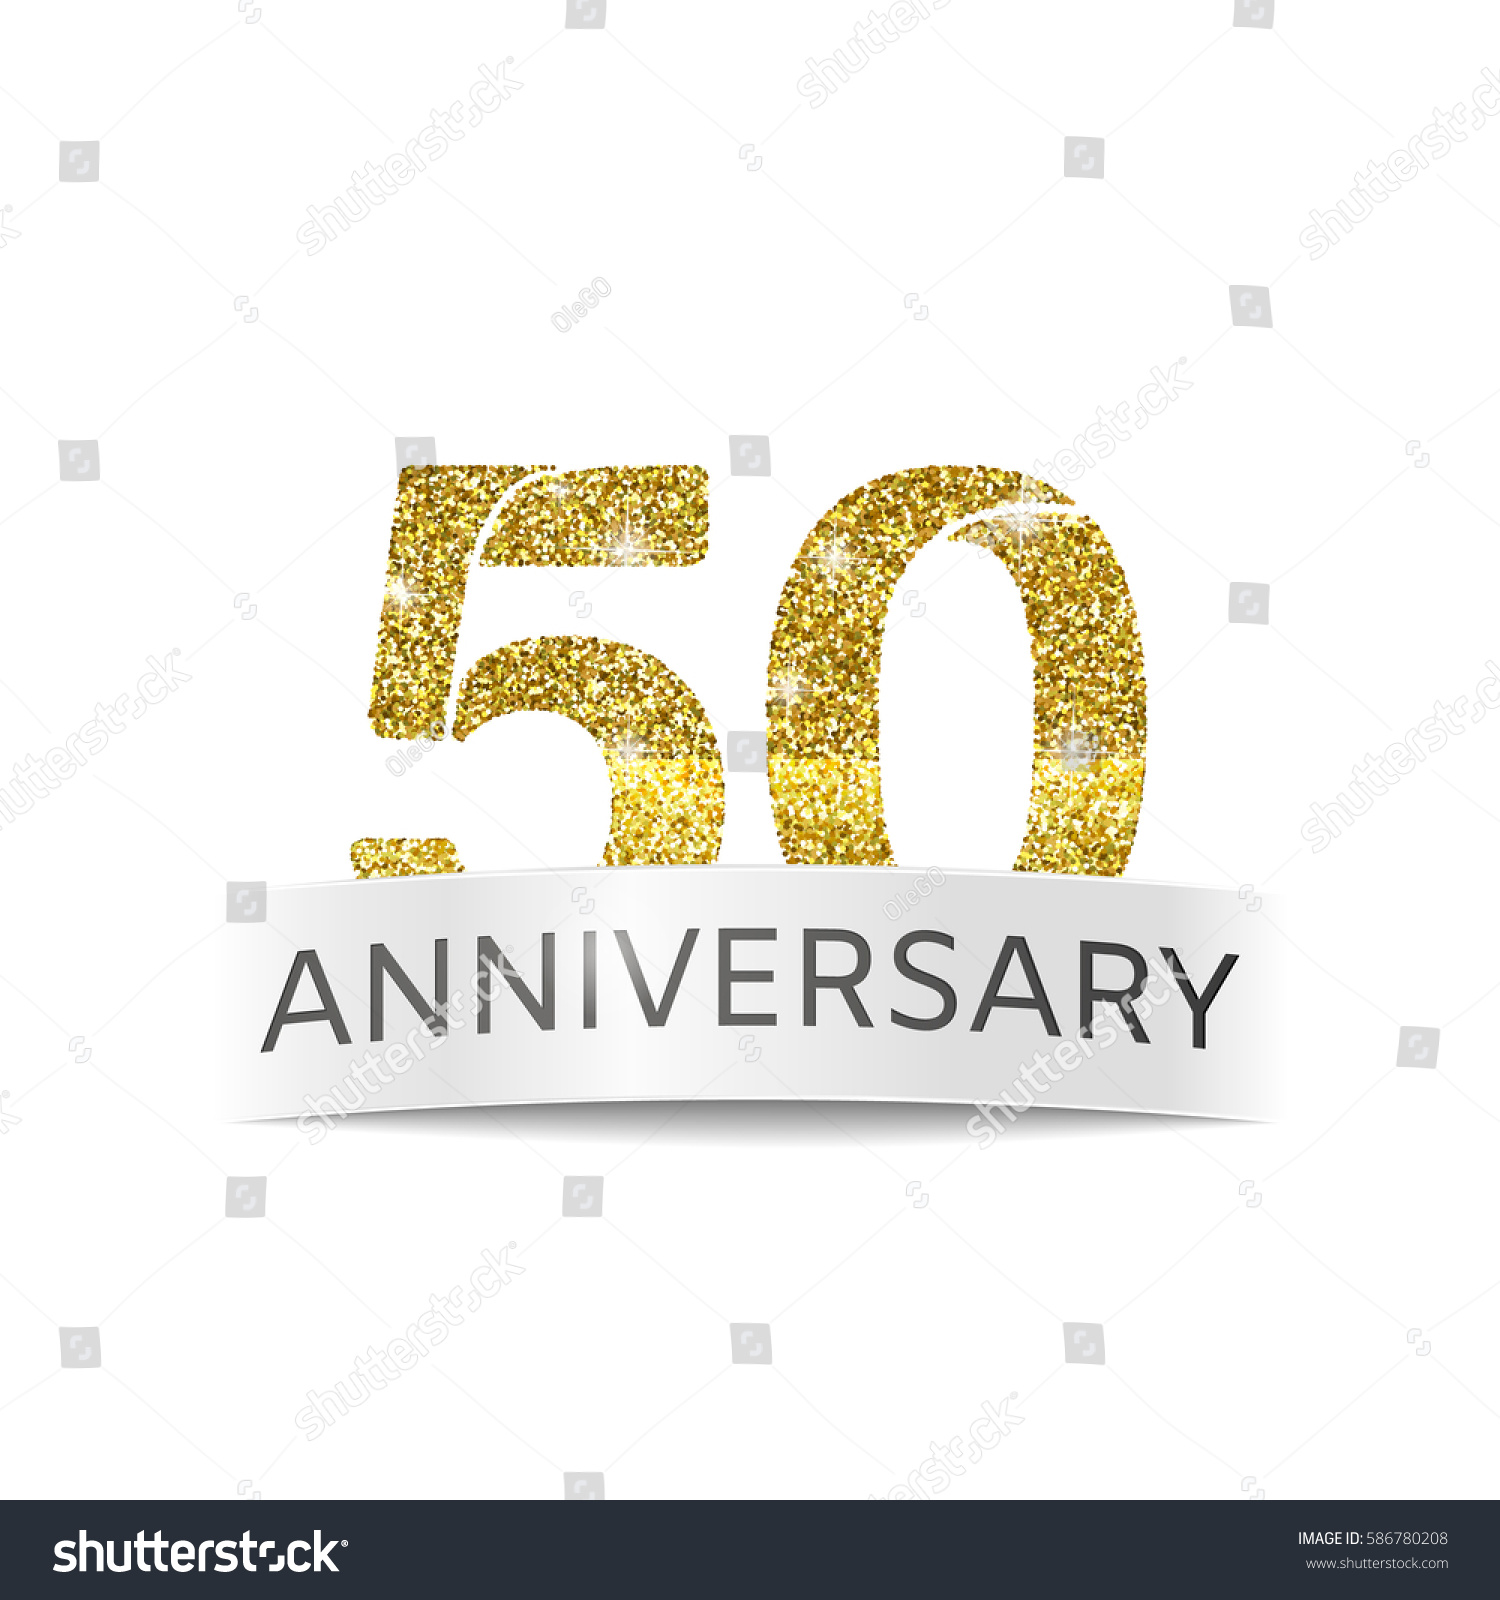 SVG of Isolated abstract Fiftieth birthday anniversary banner vector illustration. Gold glitter logo. svg